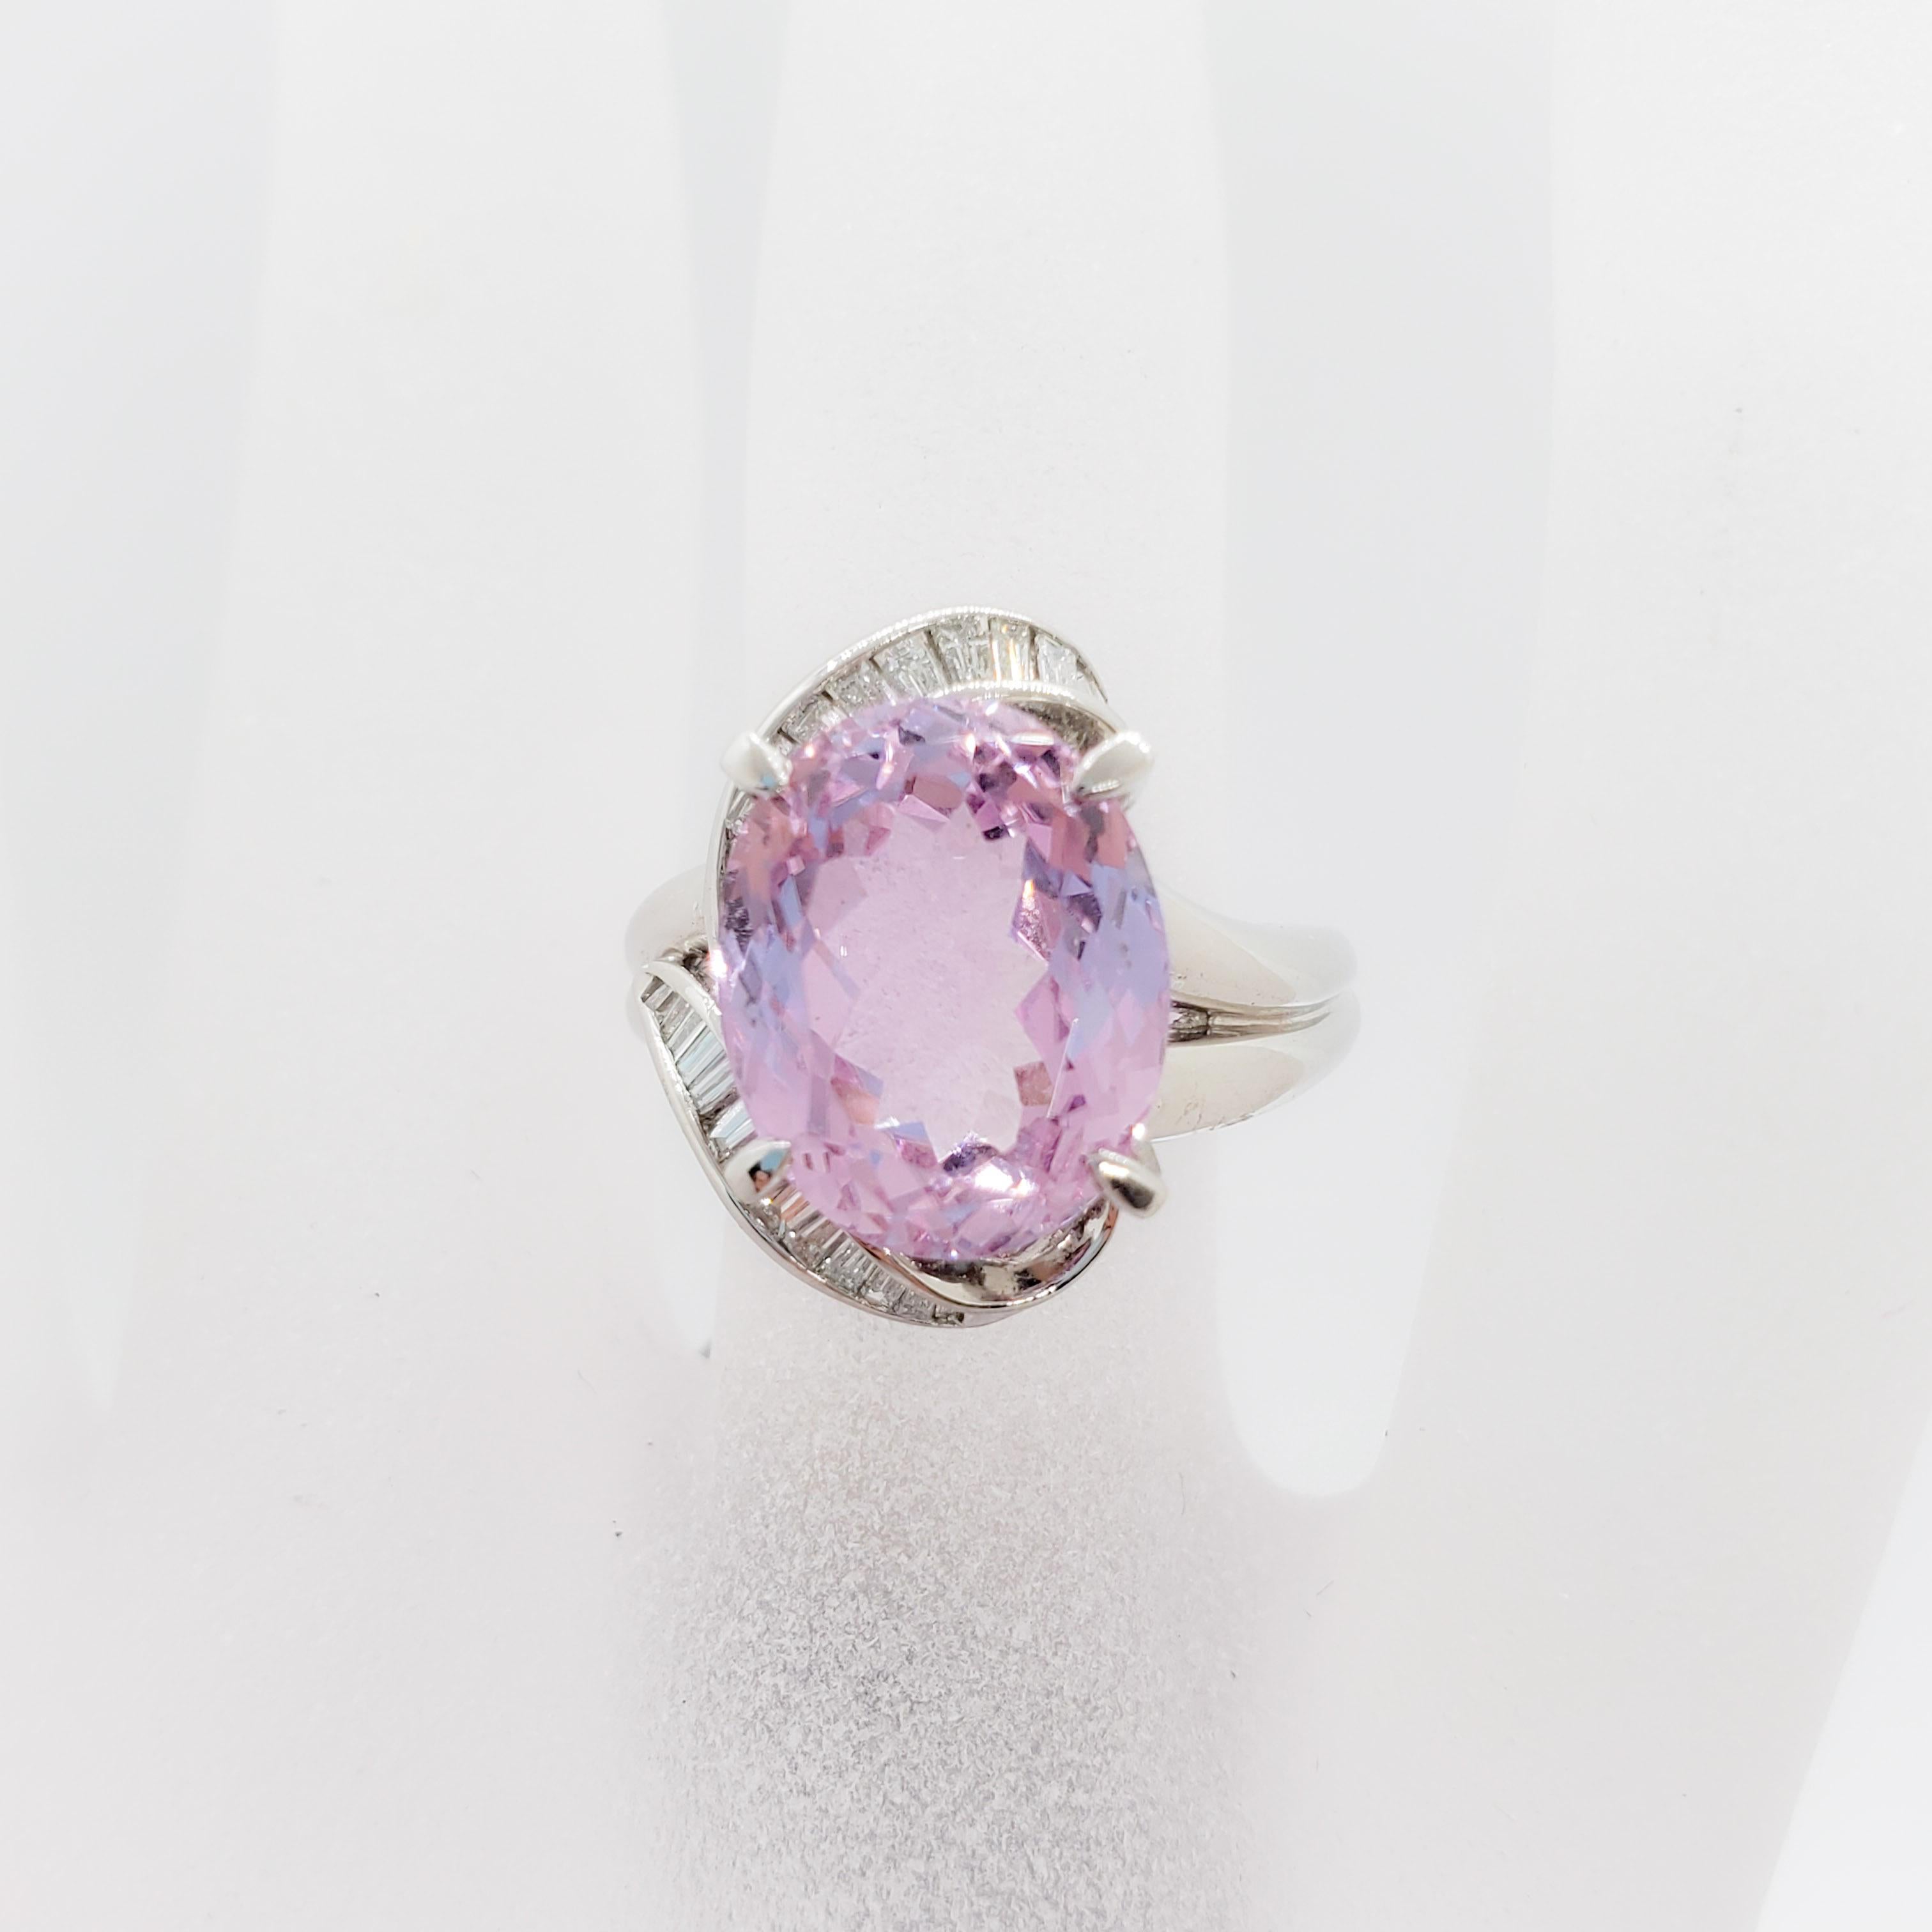 Gorgeous estate 7.70 ct. kunzite oval in a beautiful pink color with 0.43 ct. of white diamond baguettes.  Handmade platinum mounting, ring size is 6.25.  Big look for a reasonable price.  Excellent condition.